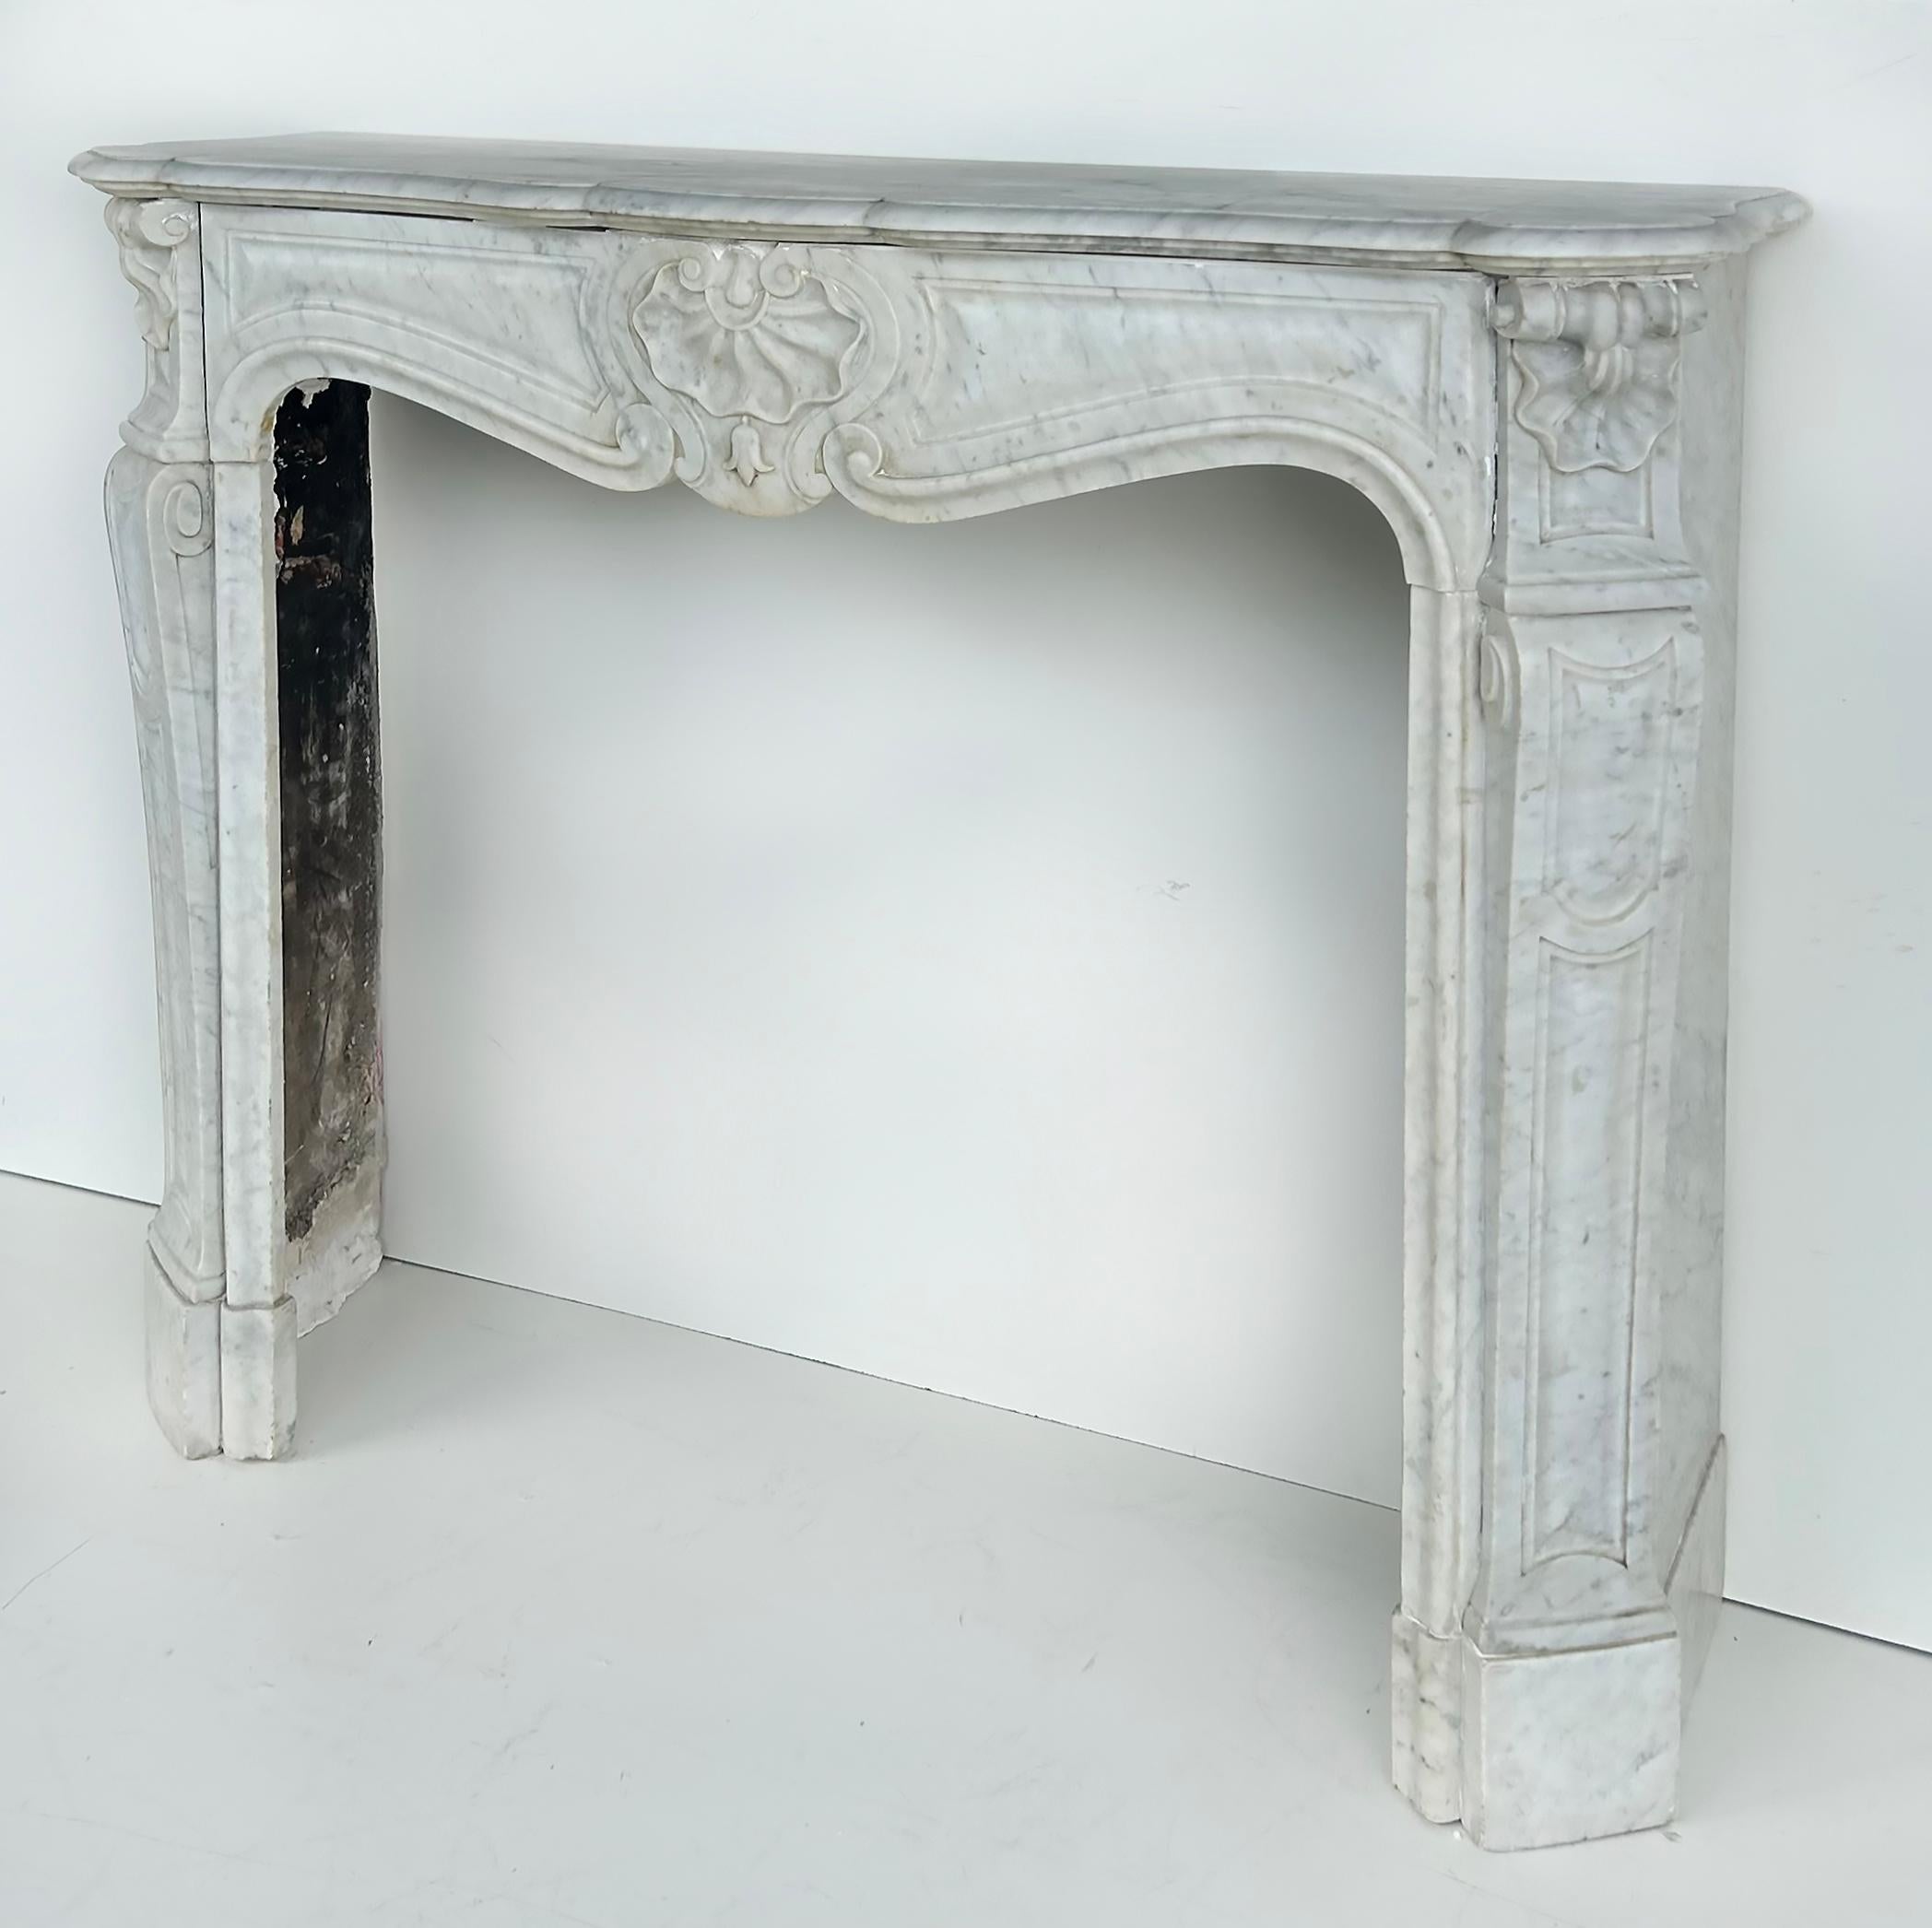 Antique French Carrara Marble Louis XV Style Fireplace Mantel 

Offered for sale is an antique French Louis XV style white Carrara carved marble fireplace mantel which is a fresh estate find from an important Key Biscayne, Florida estate.  This